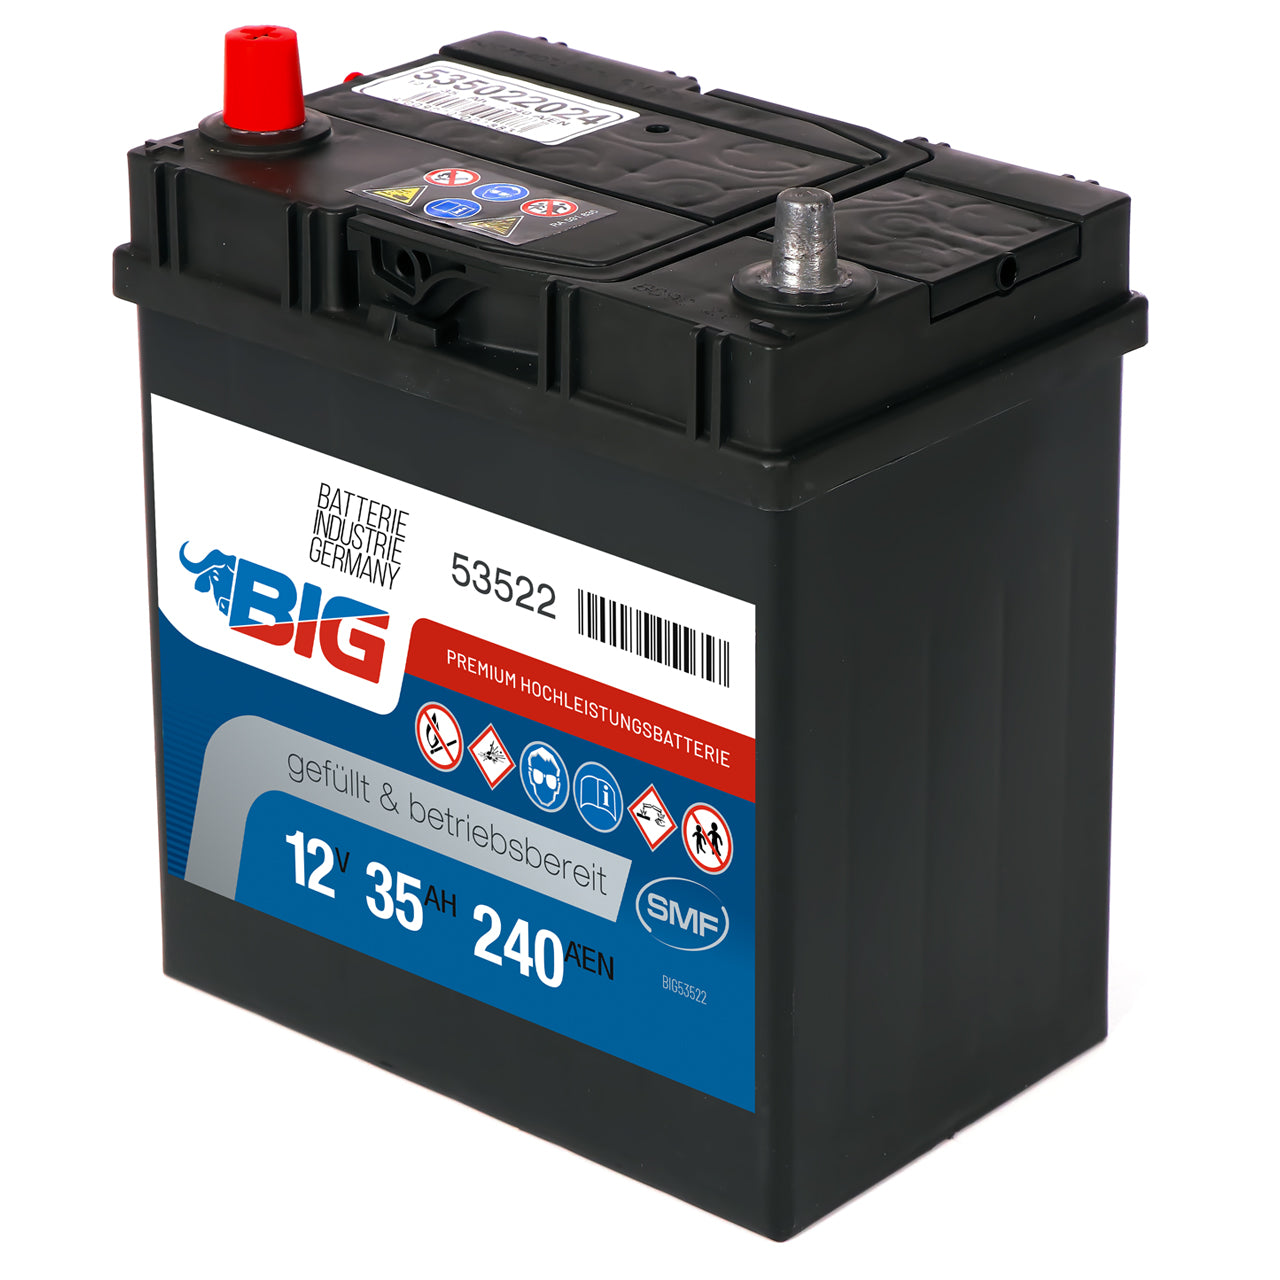 Battery Shop L2 S3005 Bosch Made in Germany